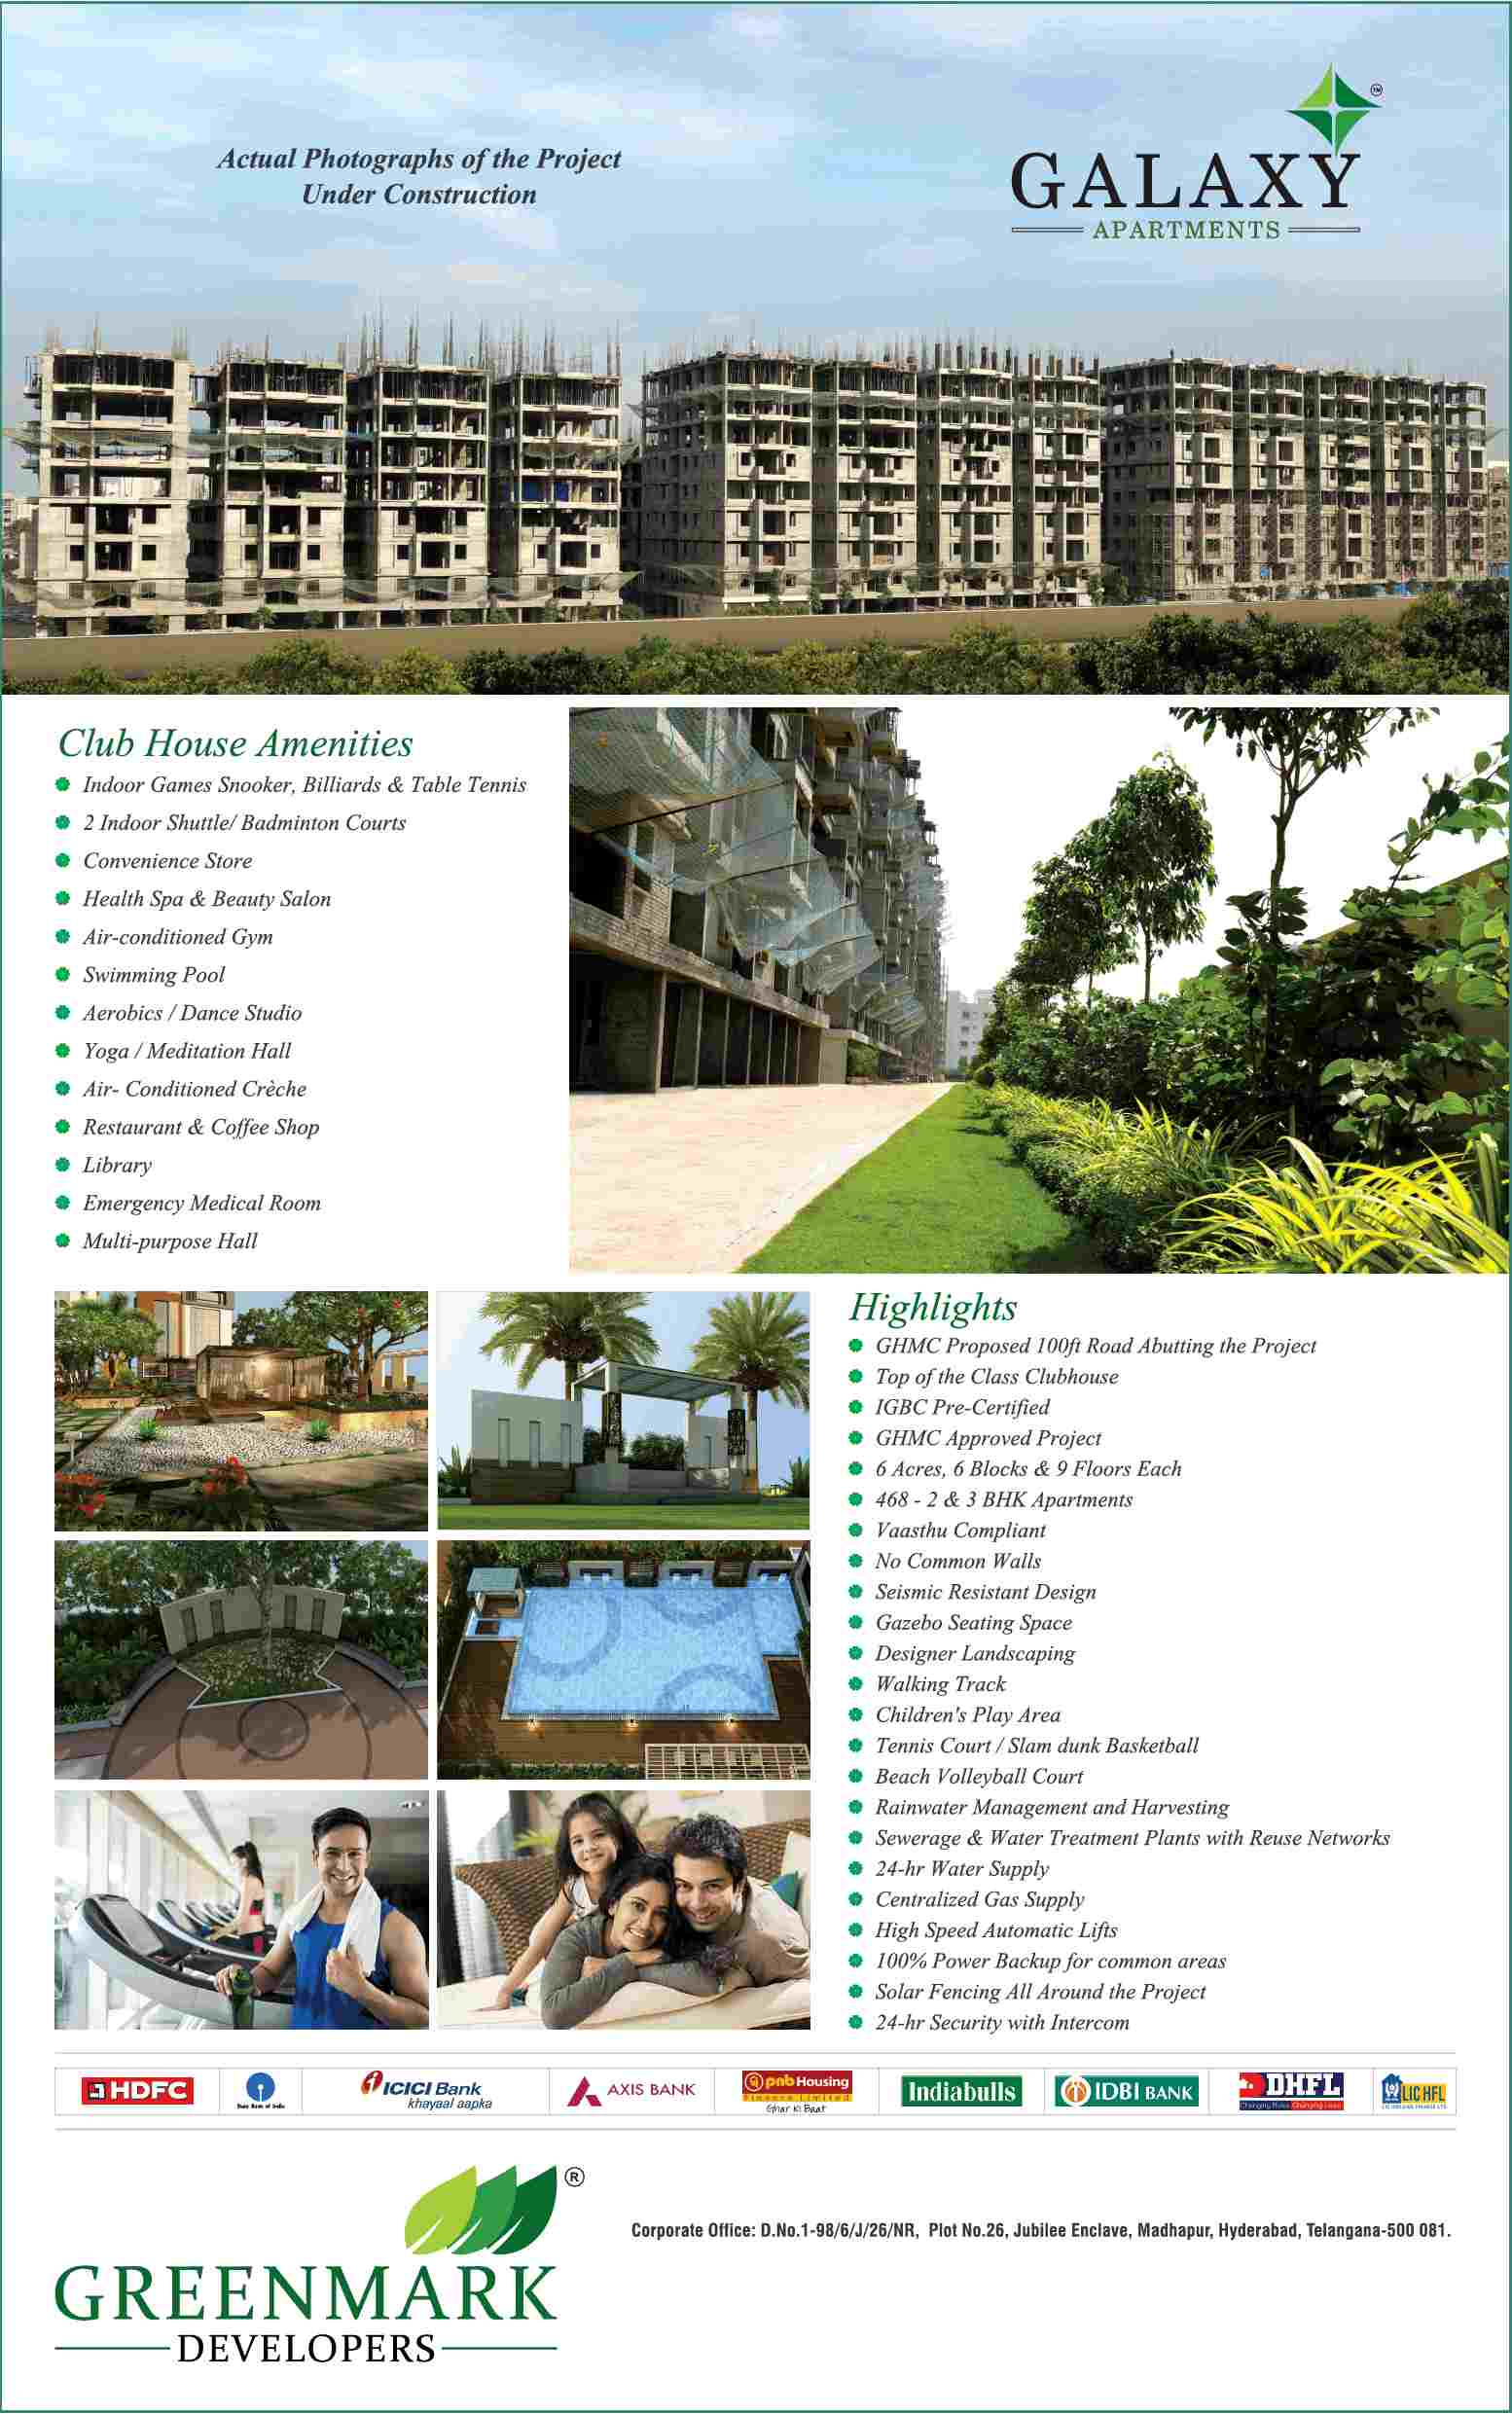 Reside at Greenmark Galaxy and enjoy the clubhouse amenities in Hyderabad Update